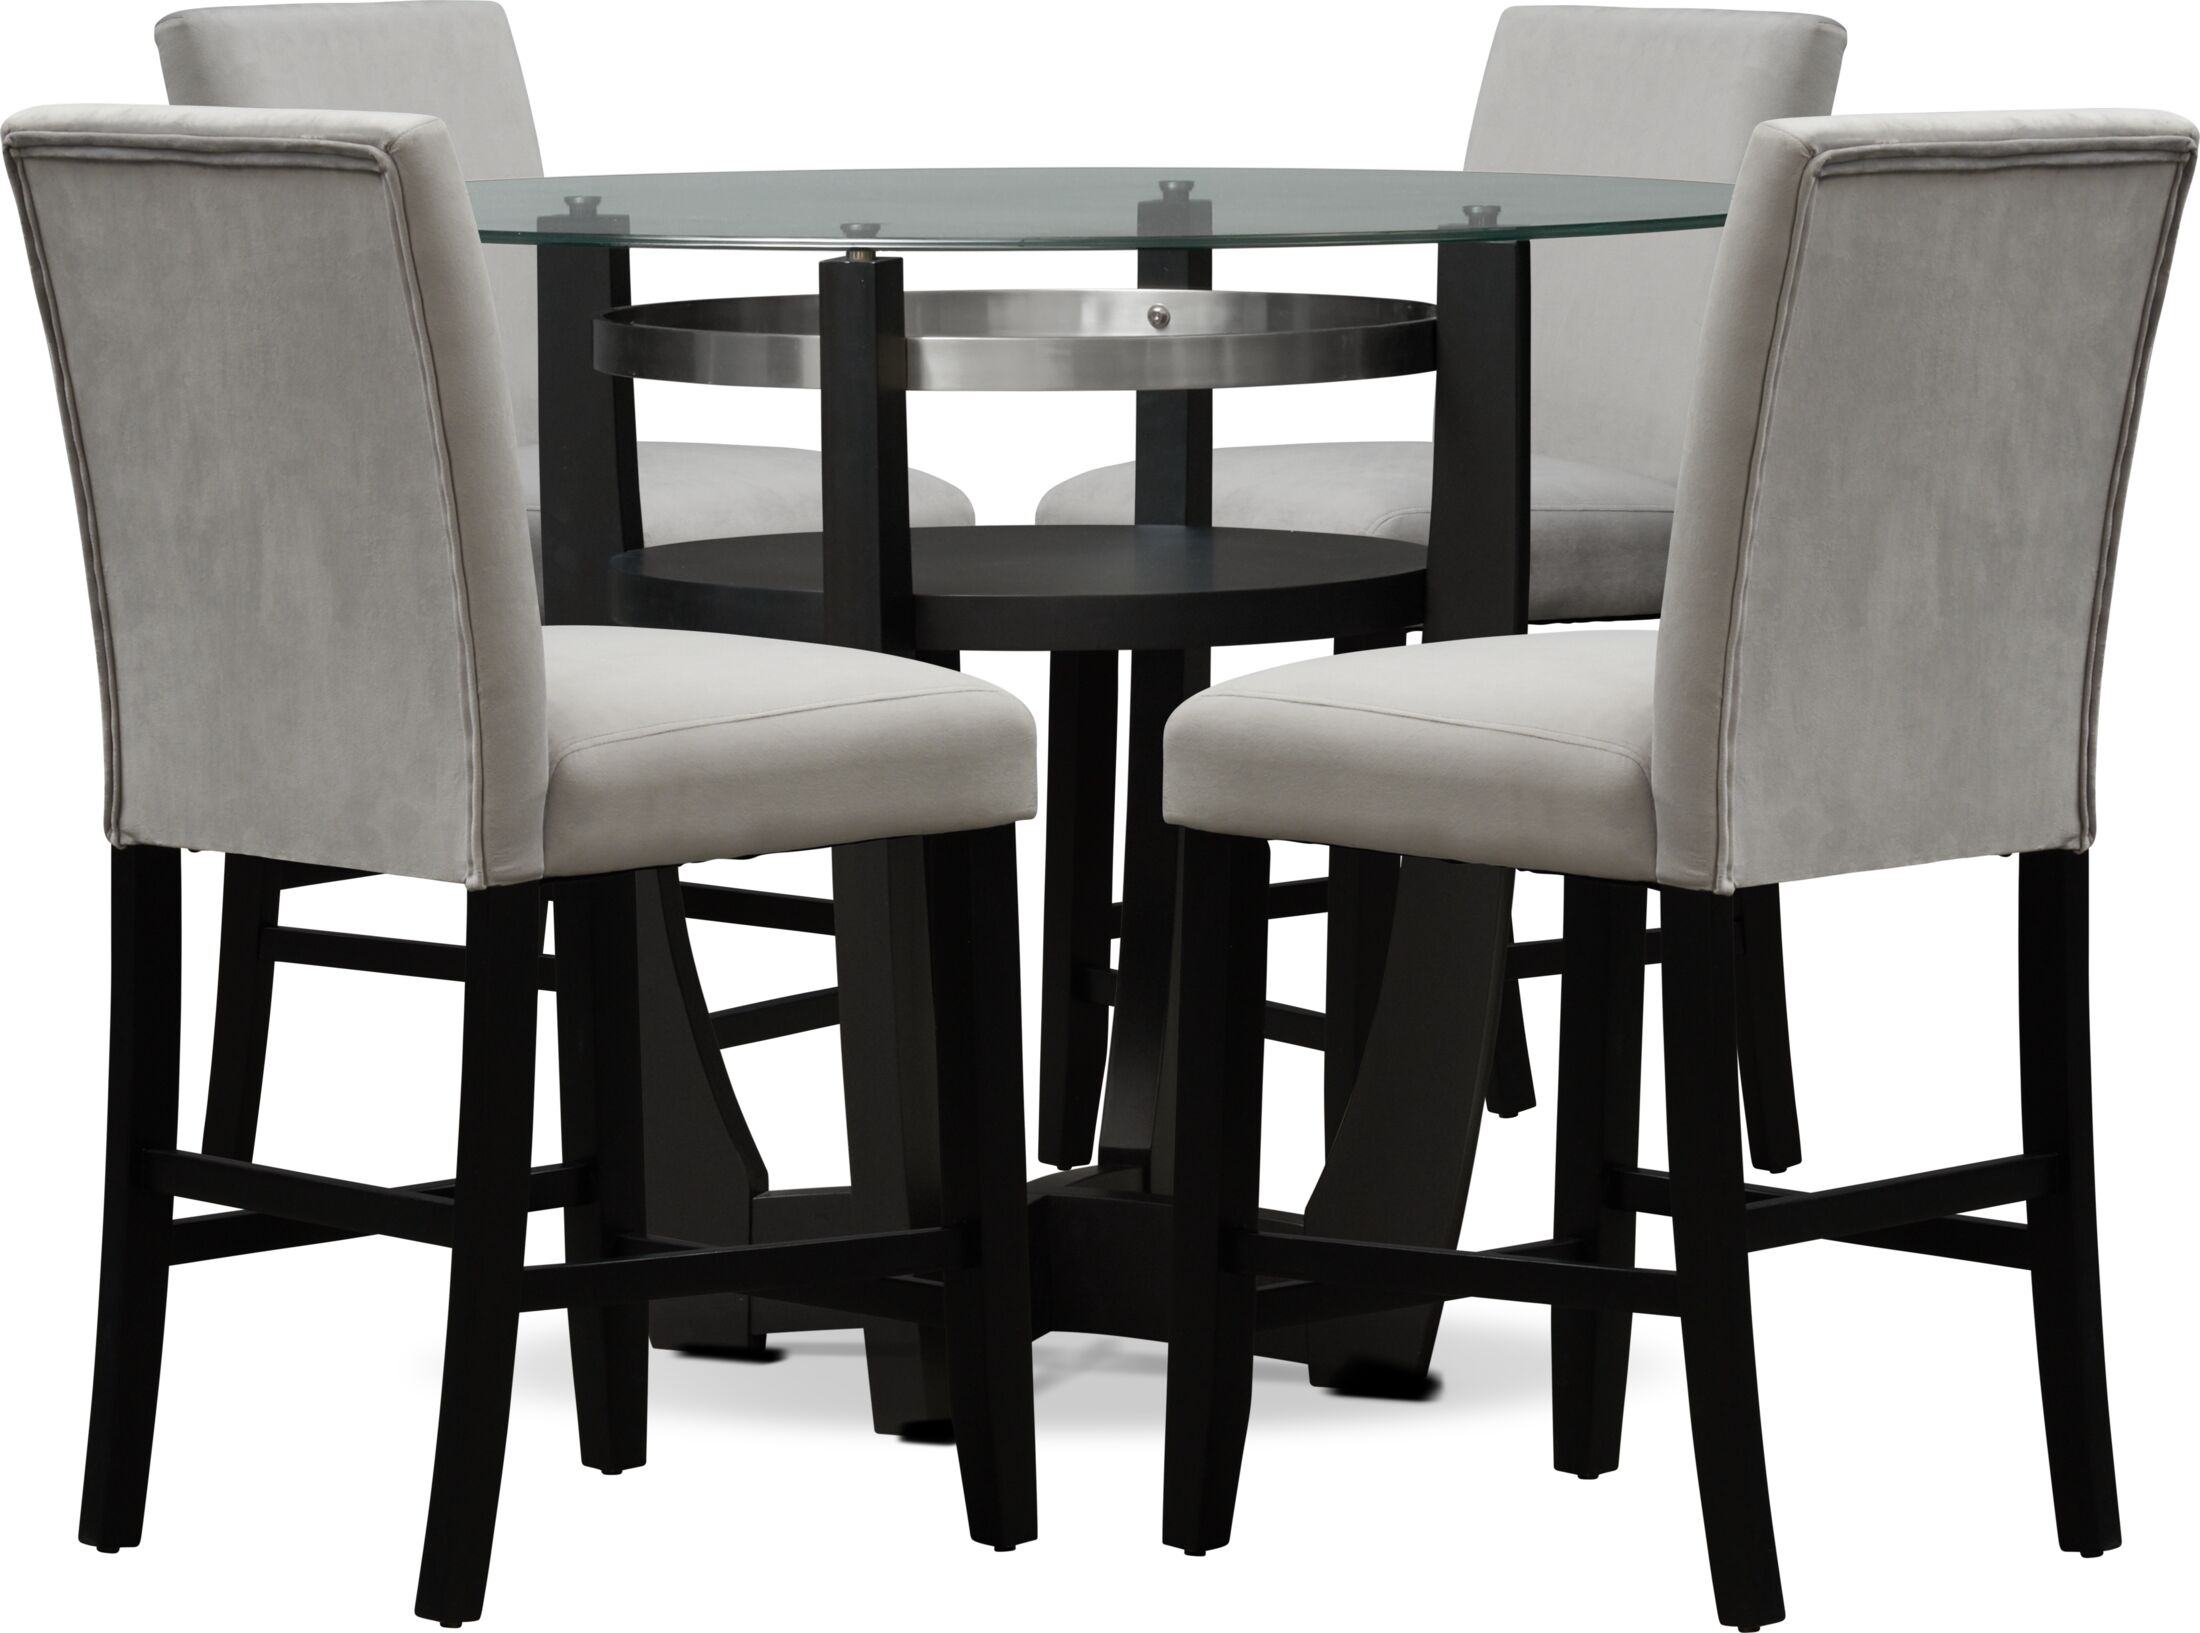 Undefined Value City Furniture, What Height Are Dining Tables